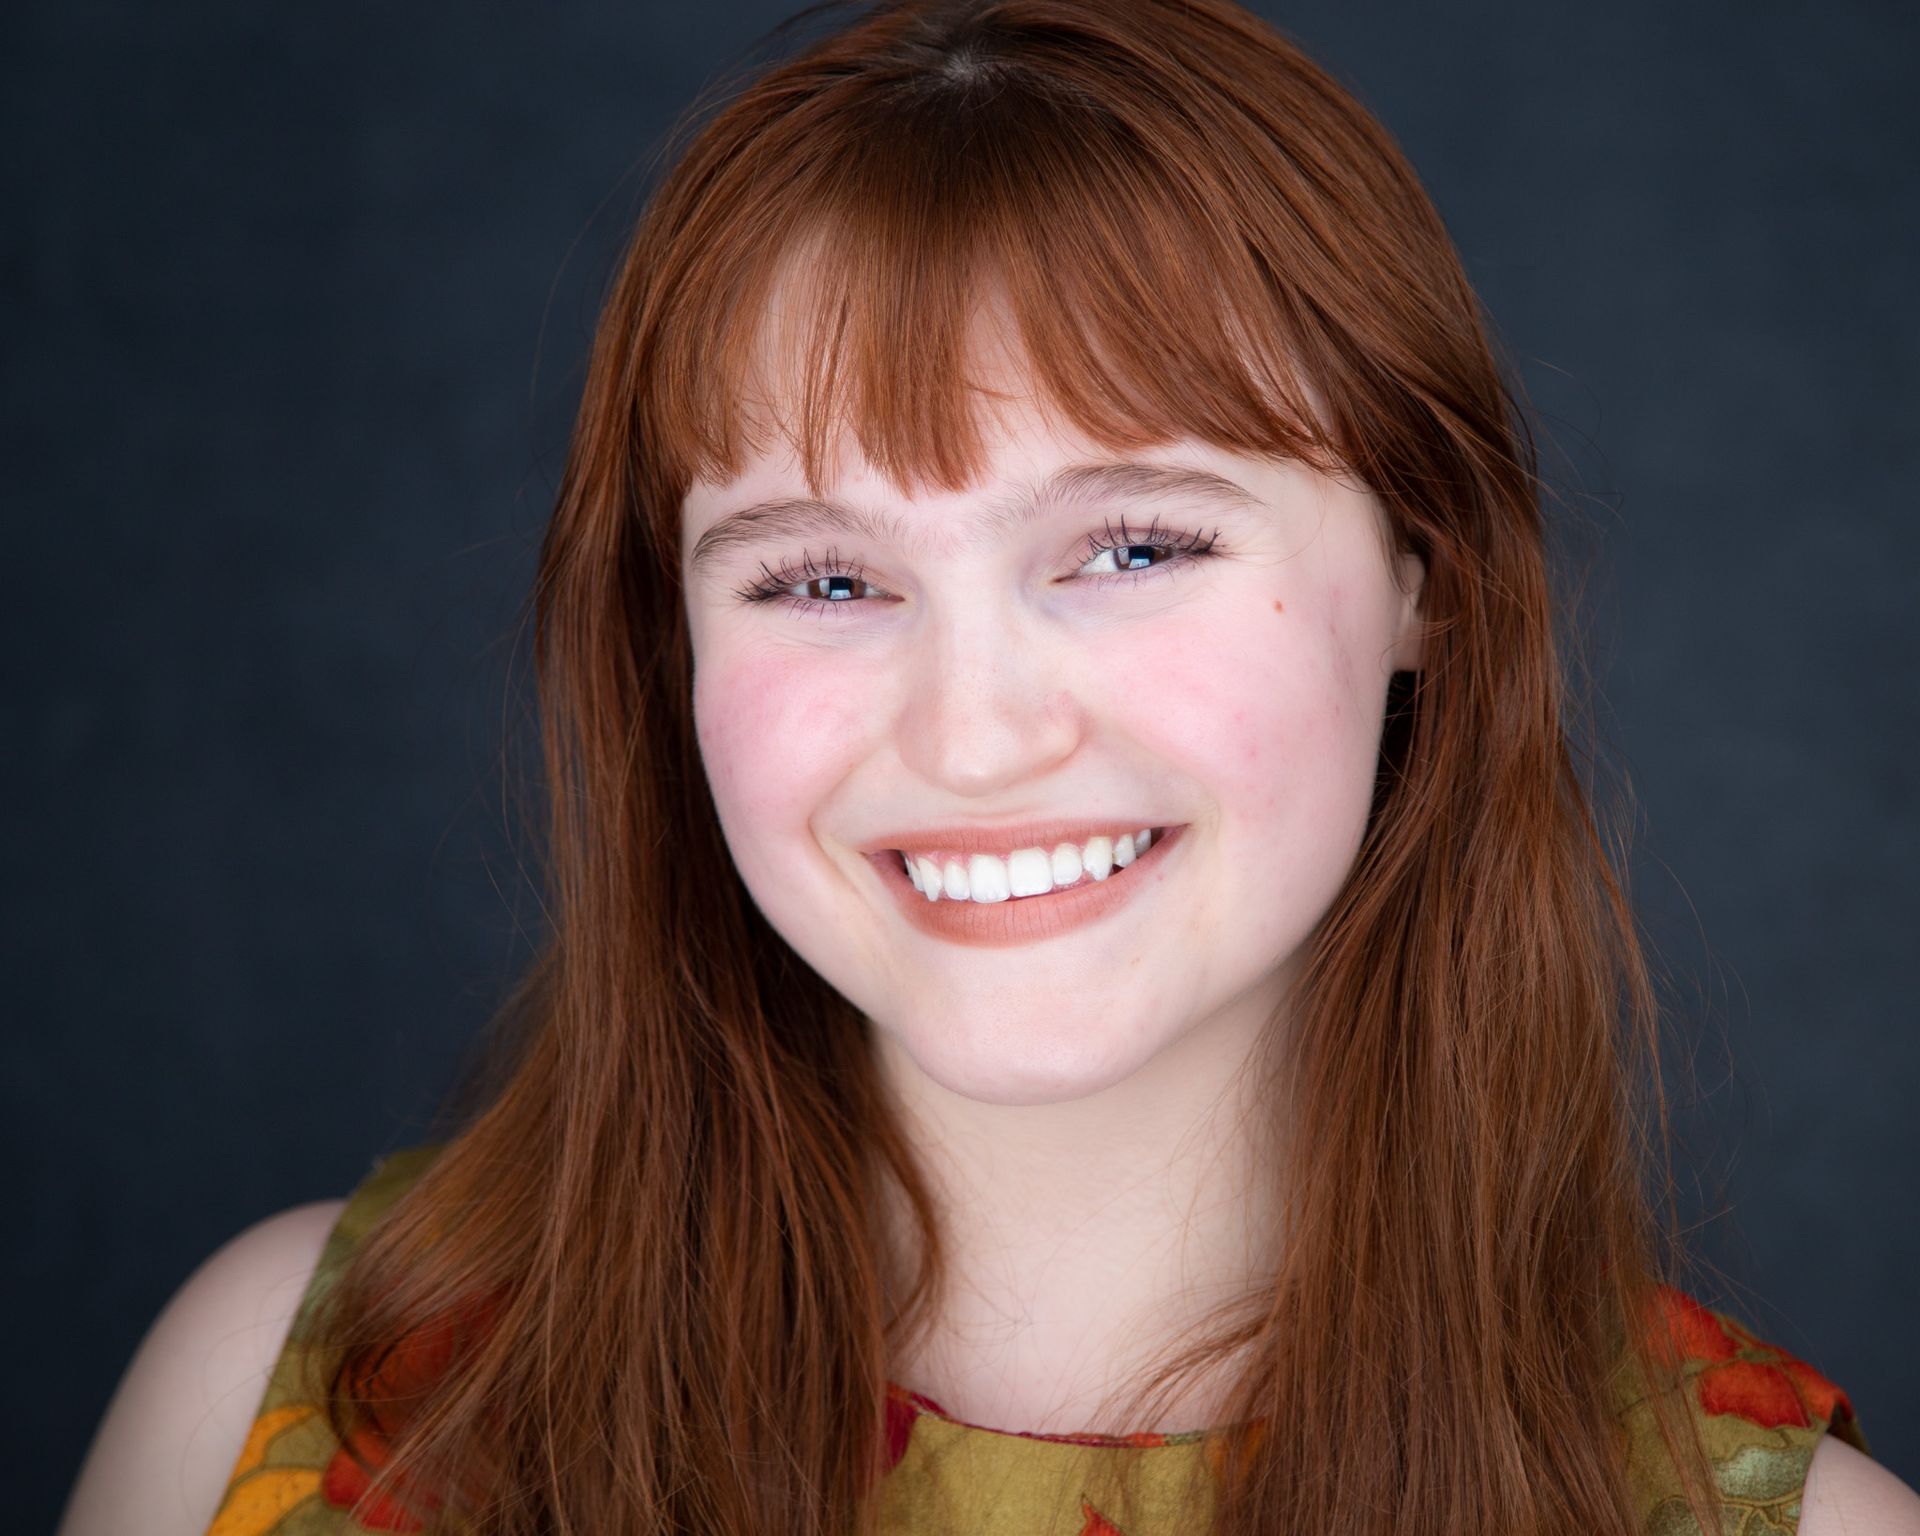 A headshot of a woman with red hair in a flowered top on a gray background